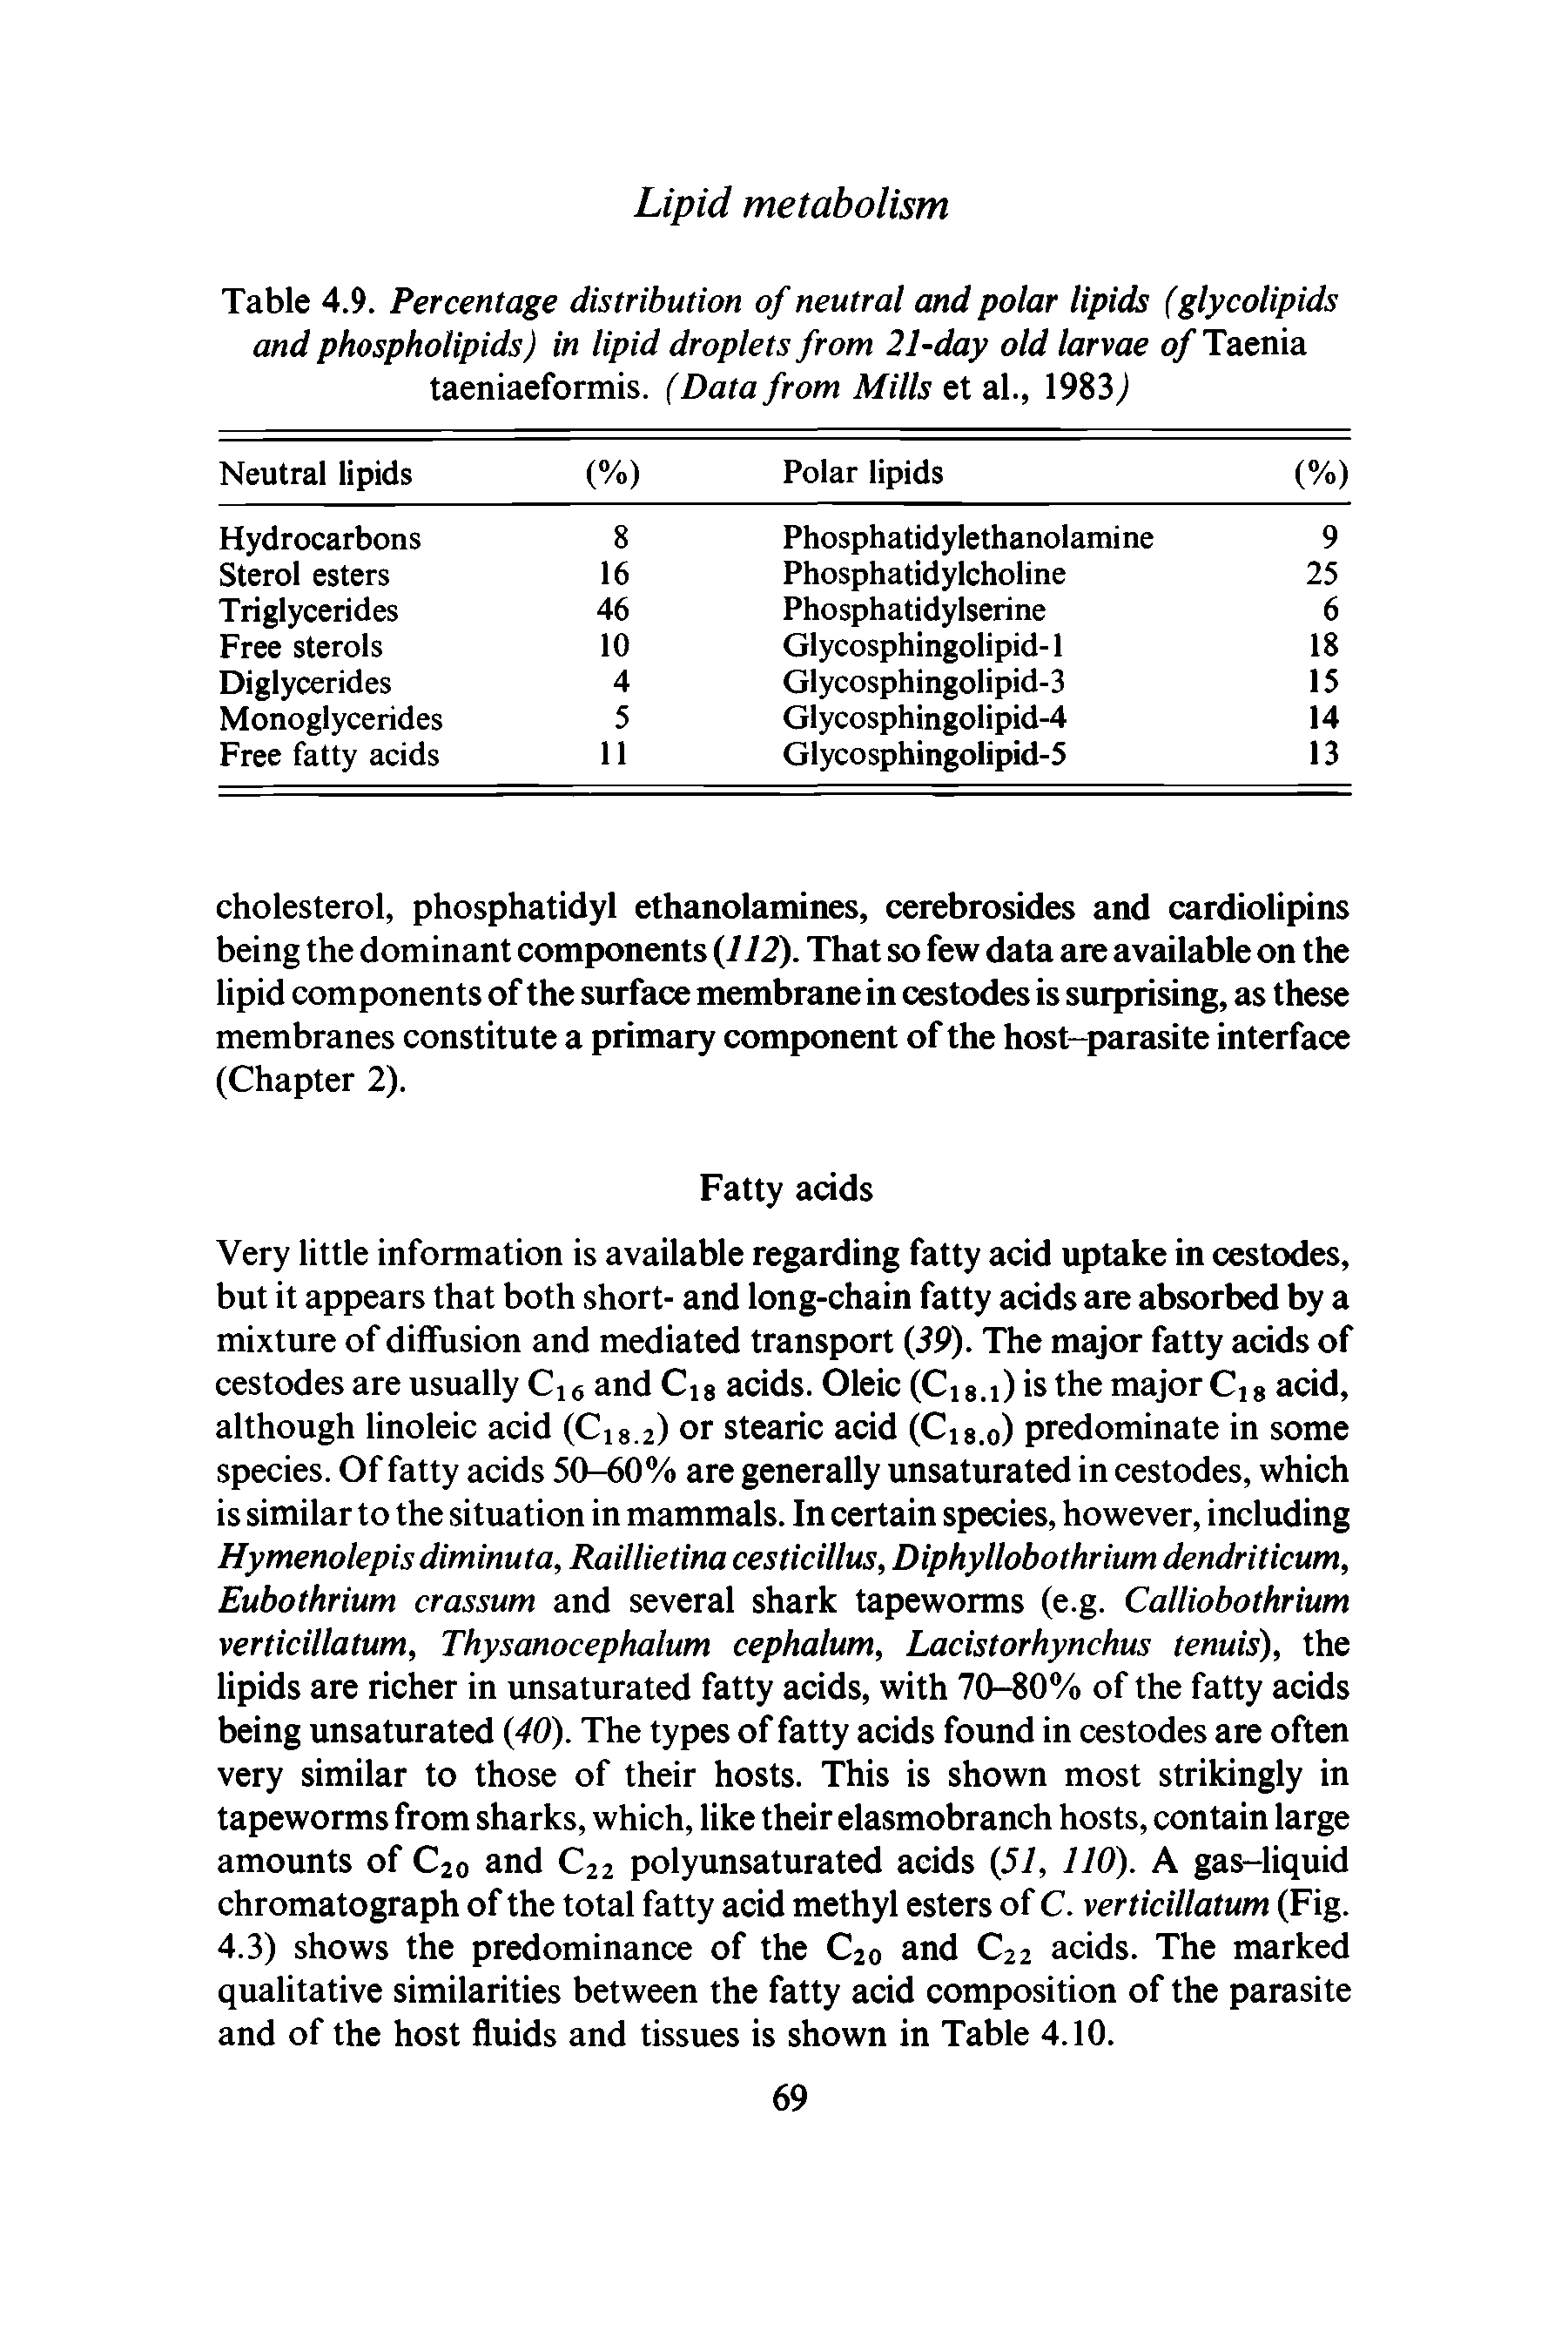 Table 4.9. Percentage distribution of neutral and polar lipids (glycolipids and phospholipids) in lipid droplets from 21-day old larvae of Taenia taeniaeformis. (Data from Mills et al., 1983,)...